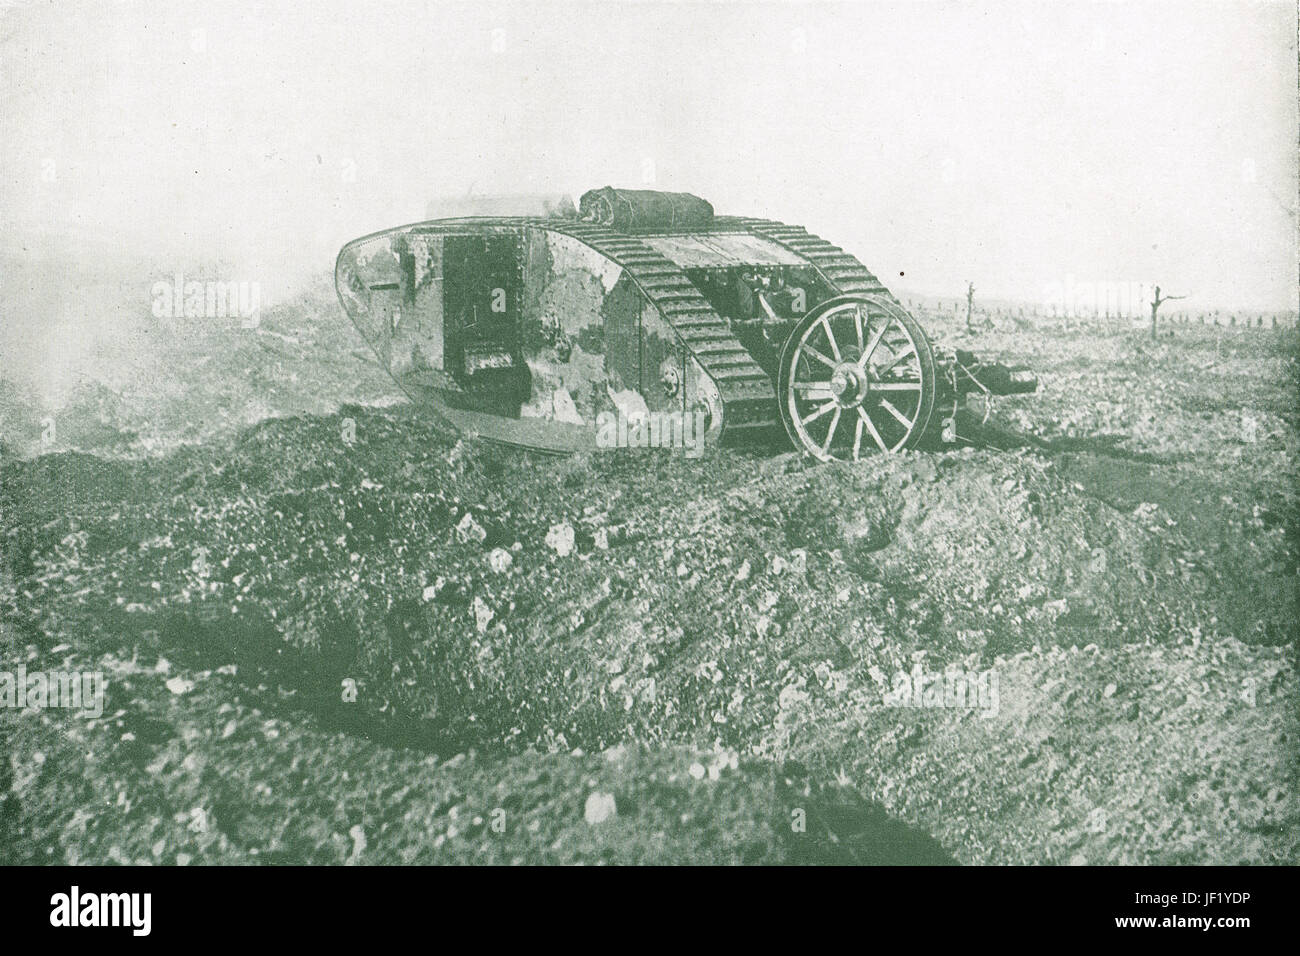 We introduced the technology of the tank at the First Battle of Somme.